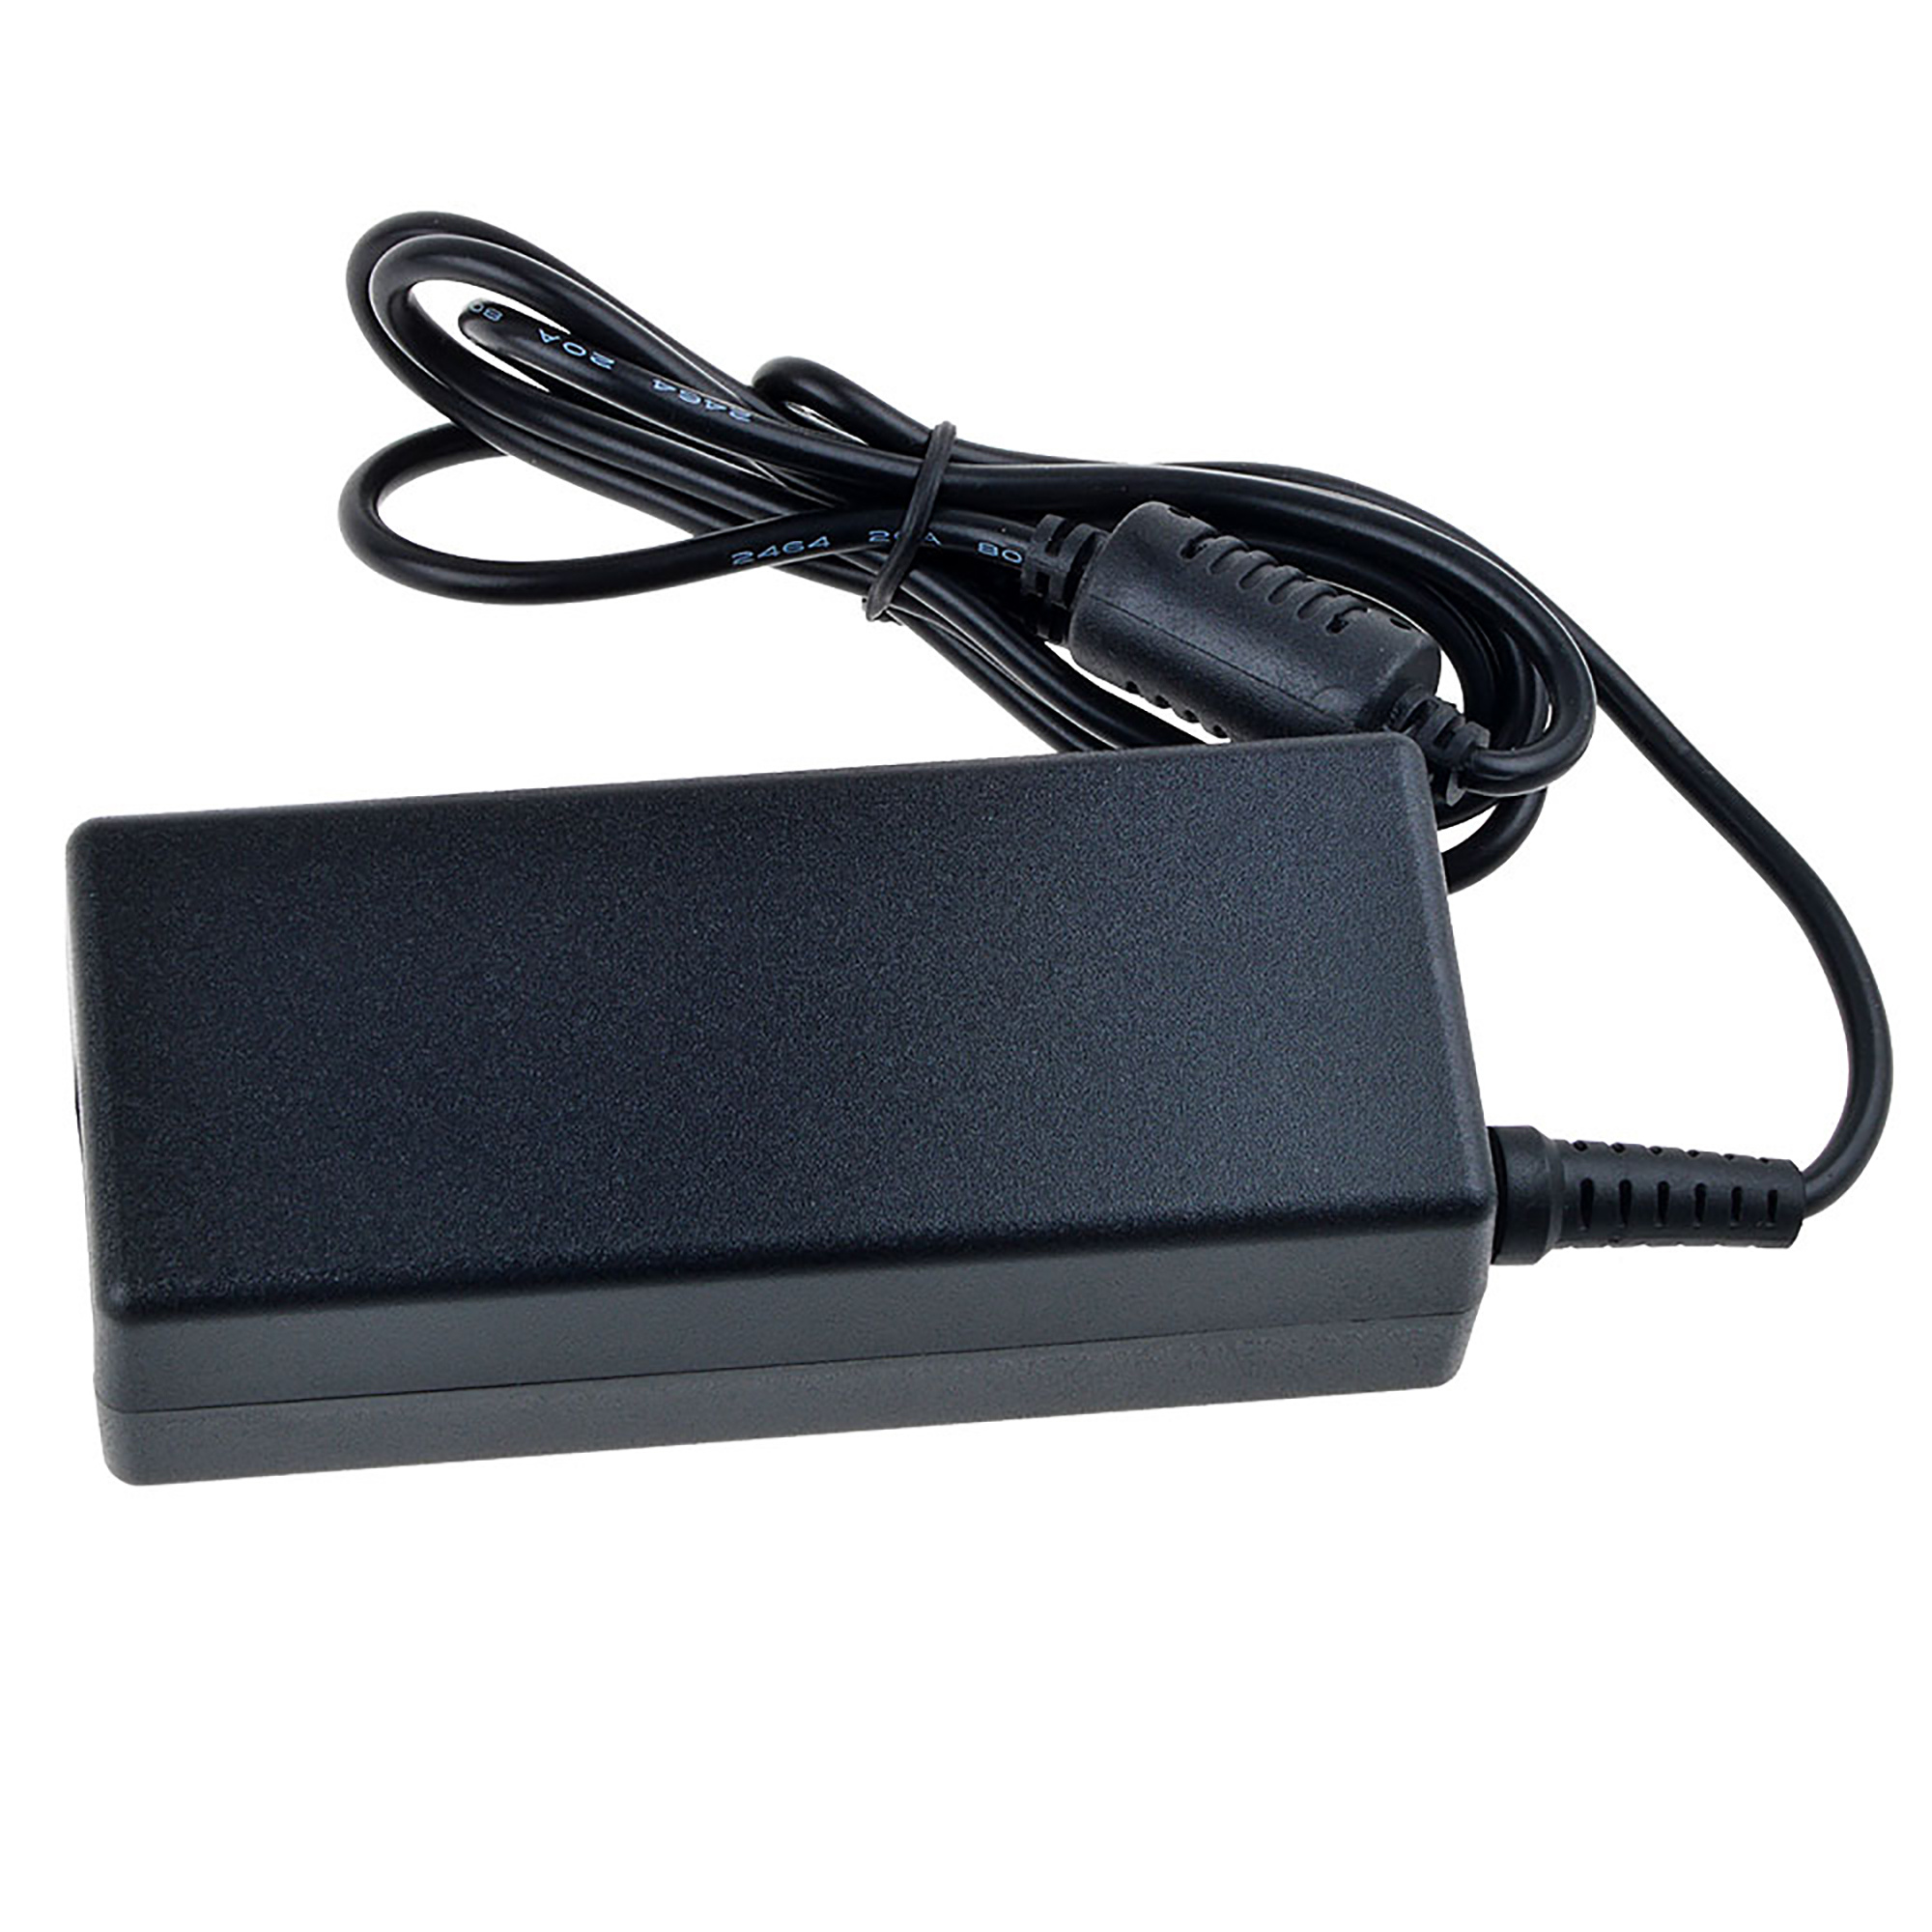 PKPOWER 65W DC Adapter Charger Replacement for Intel NUC NUC7I7BNH BOXNUC7I7BNH NUC7i5BNH PSU - image 4 of 5